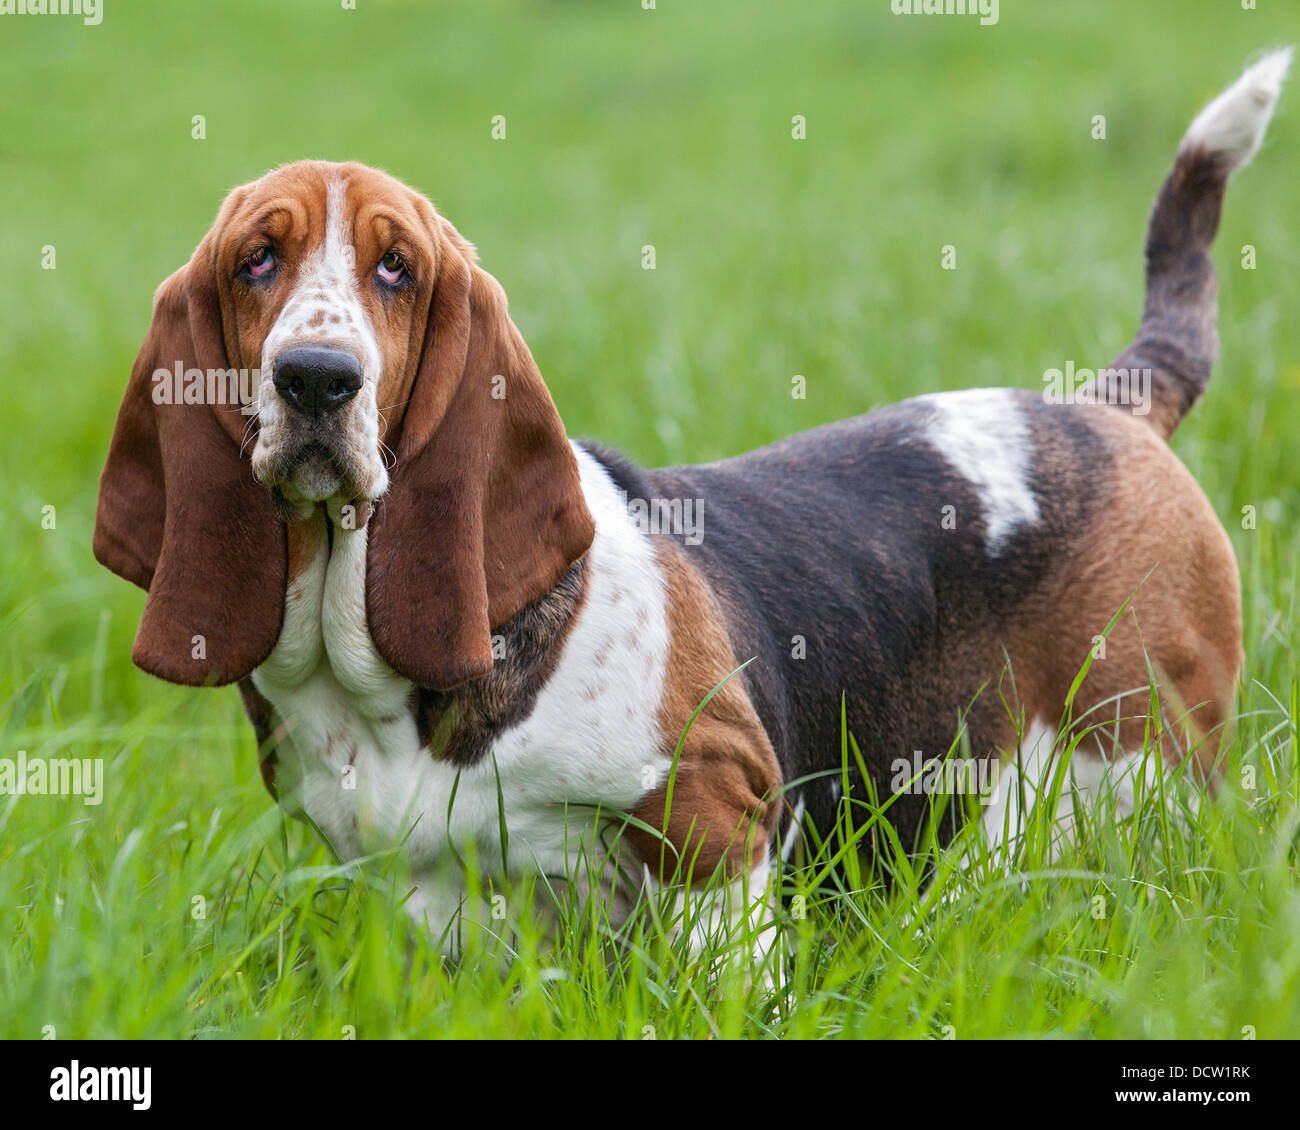 Tri-coloured basset hound standing in grass, posing Stock Photo